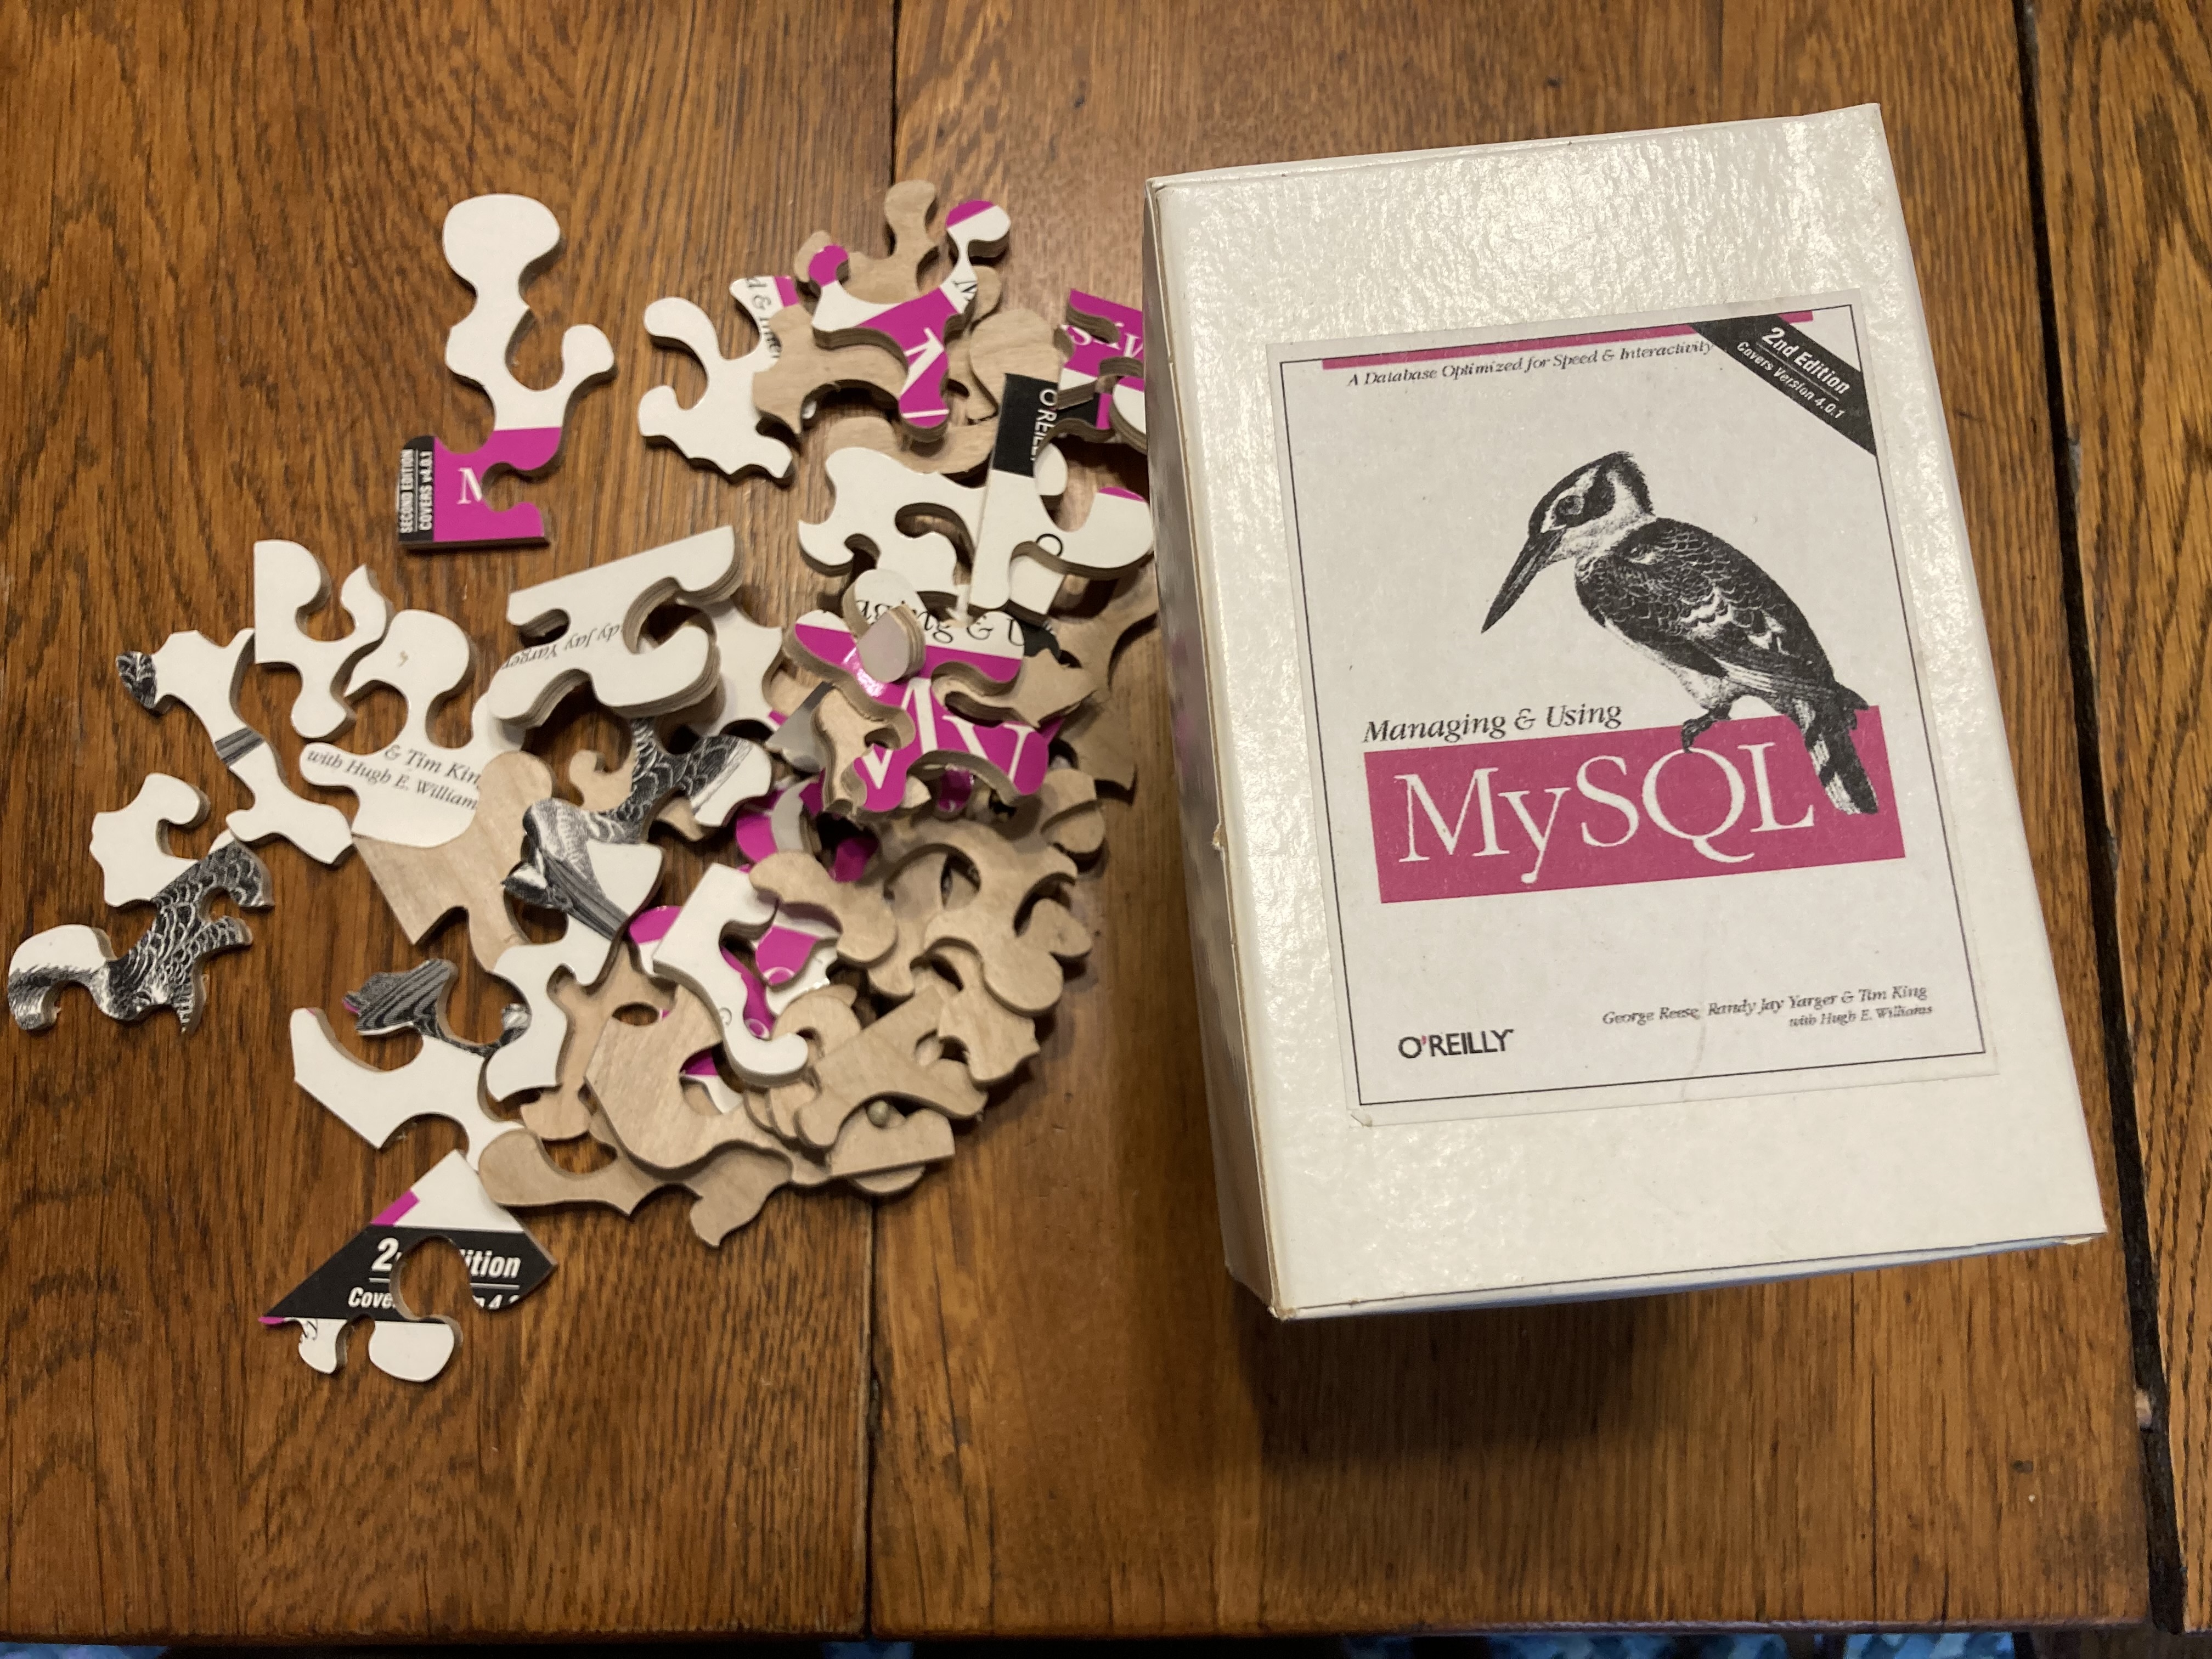 Box and pieces of jigsaw puzzle representing the cover of the book \